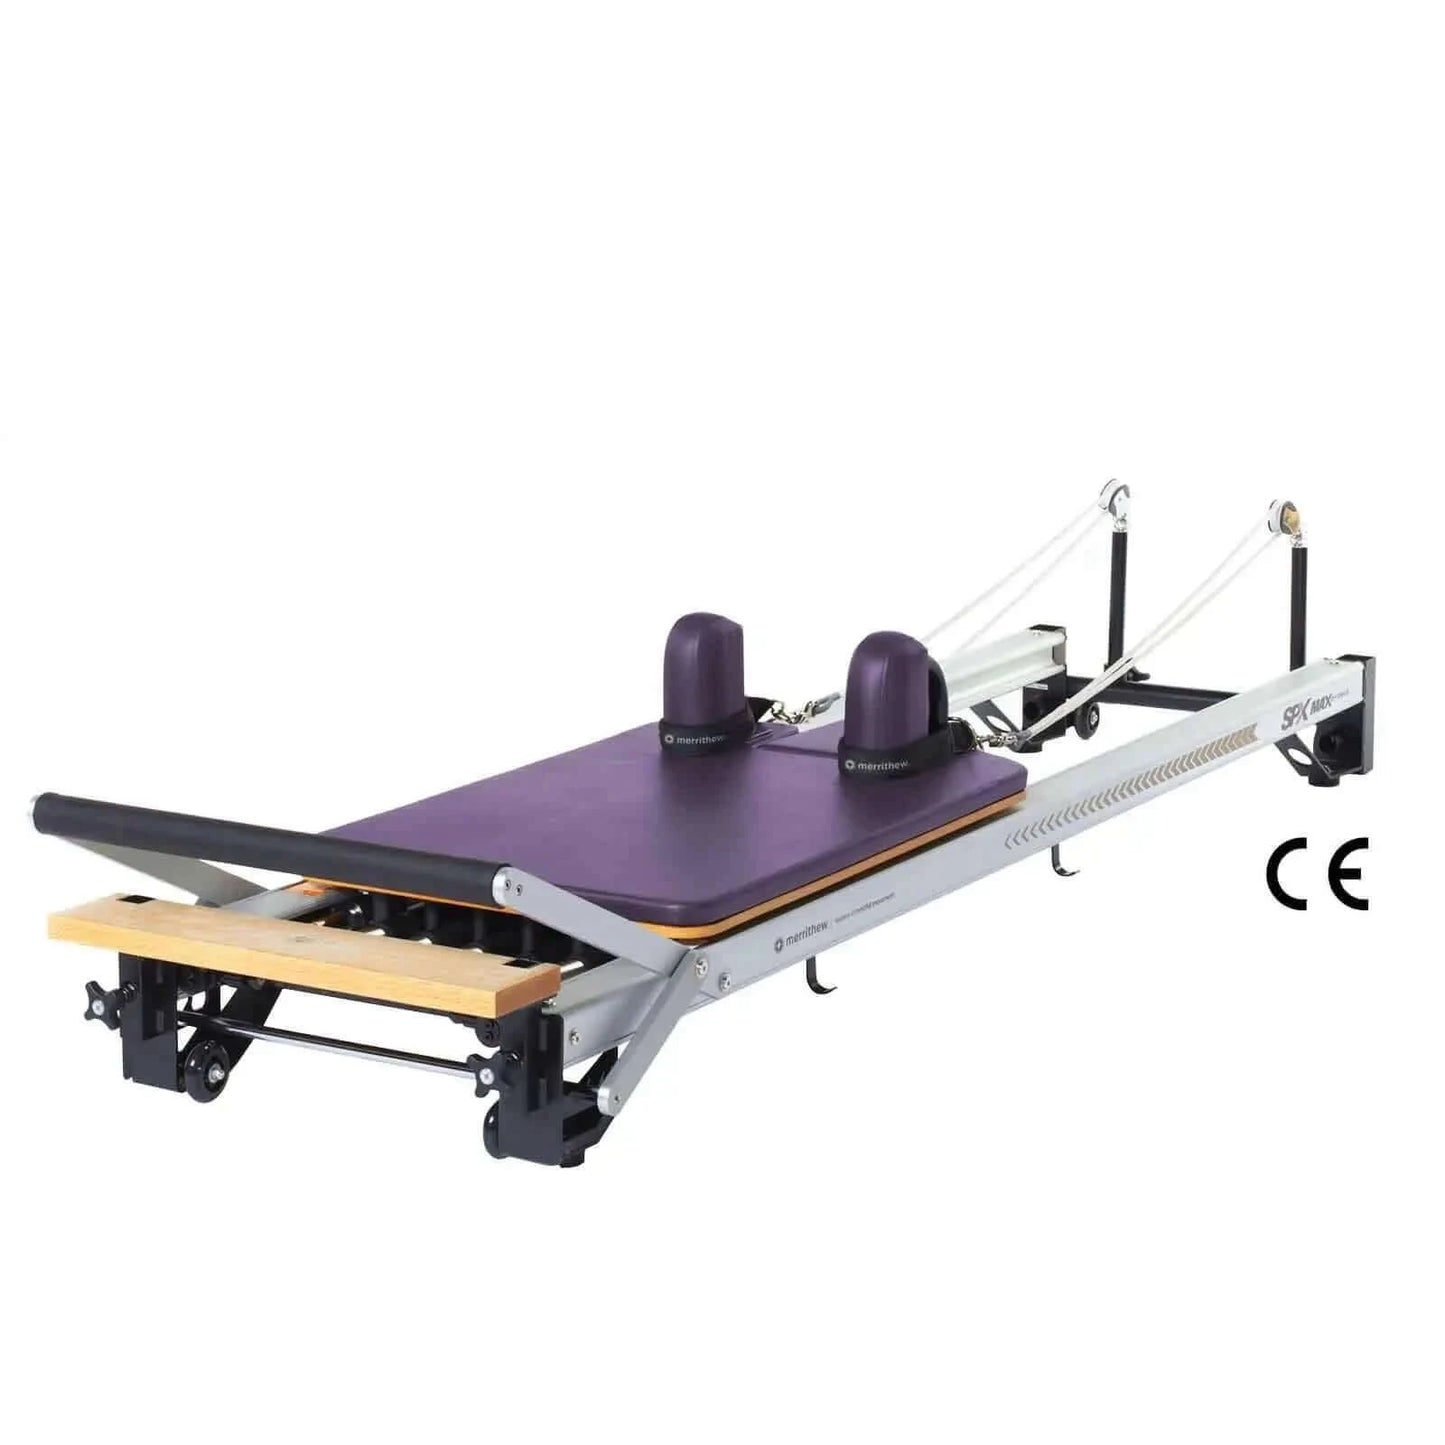 Purple Impulse Merrithew™ Pilates Reformer Extension Upgrade · SPX® Max by Merrithew™ sold by Pilates Matters® by BSP LLC